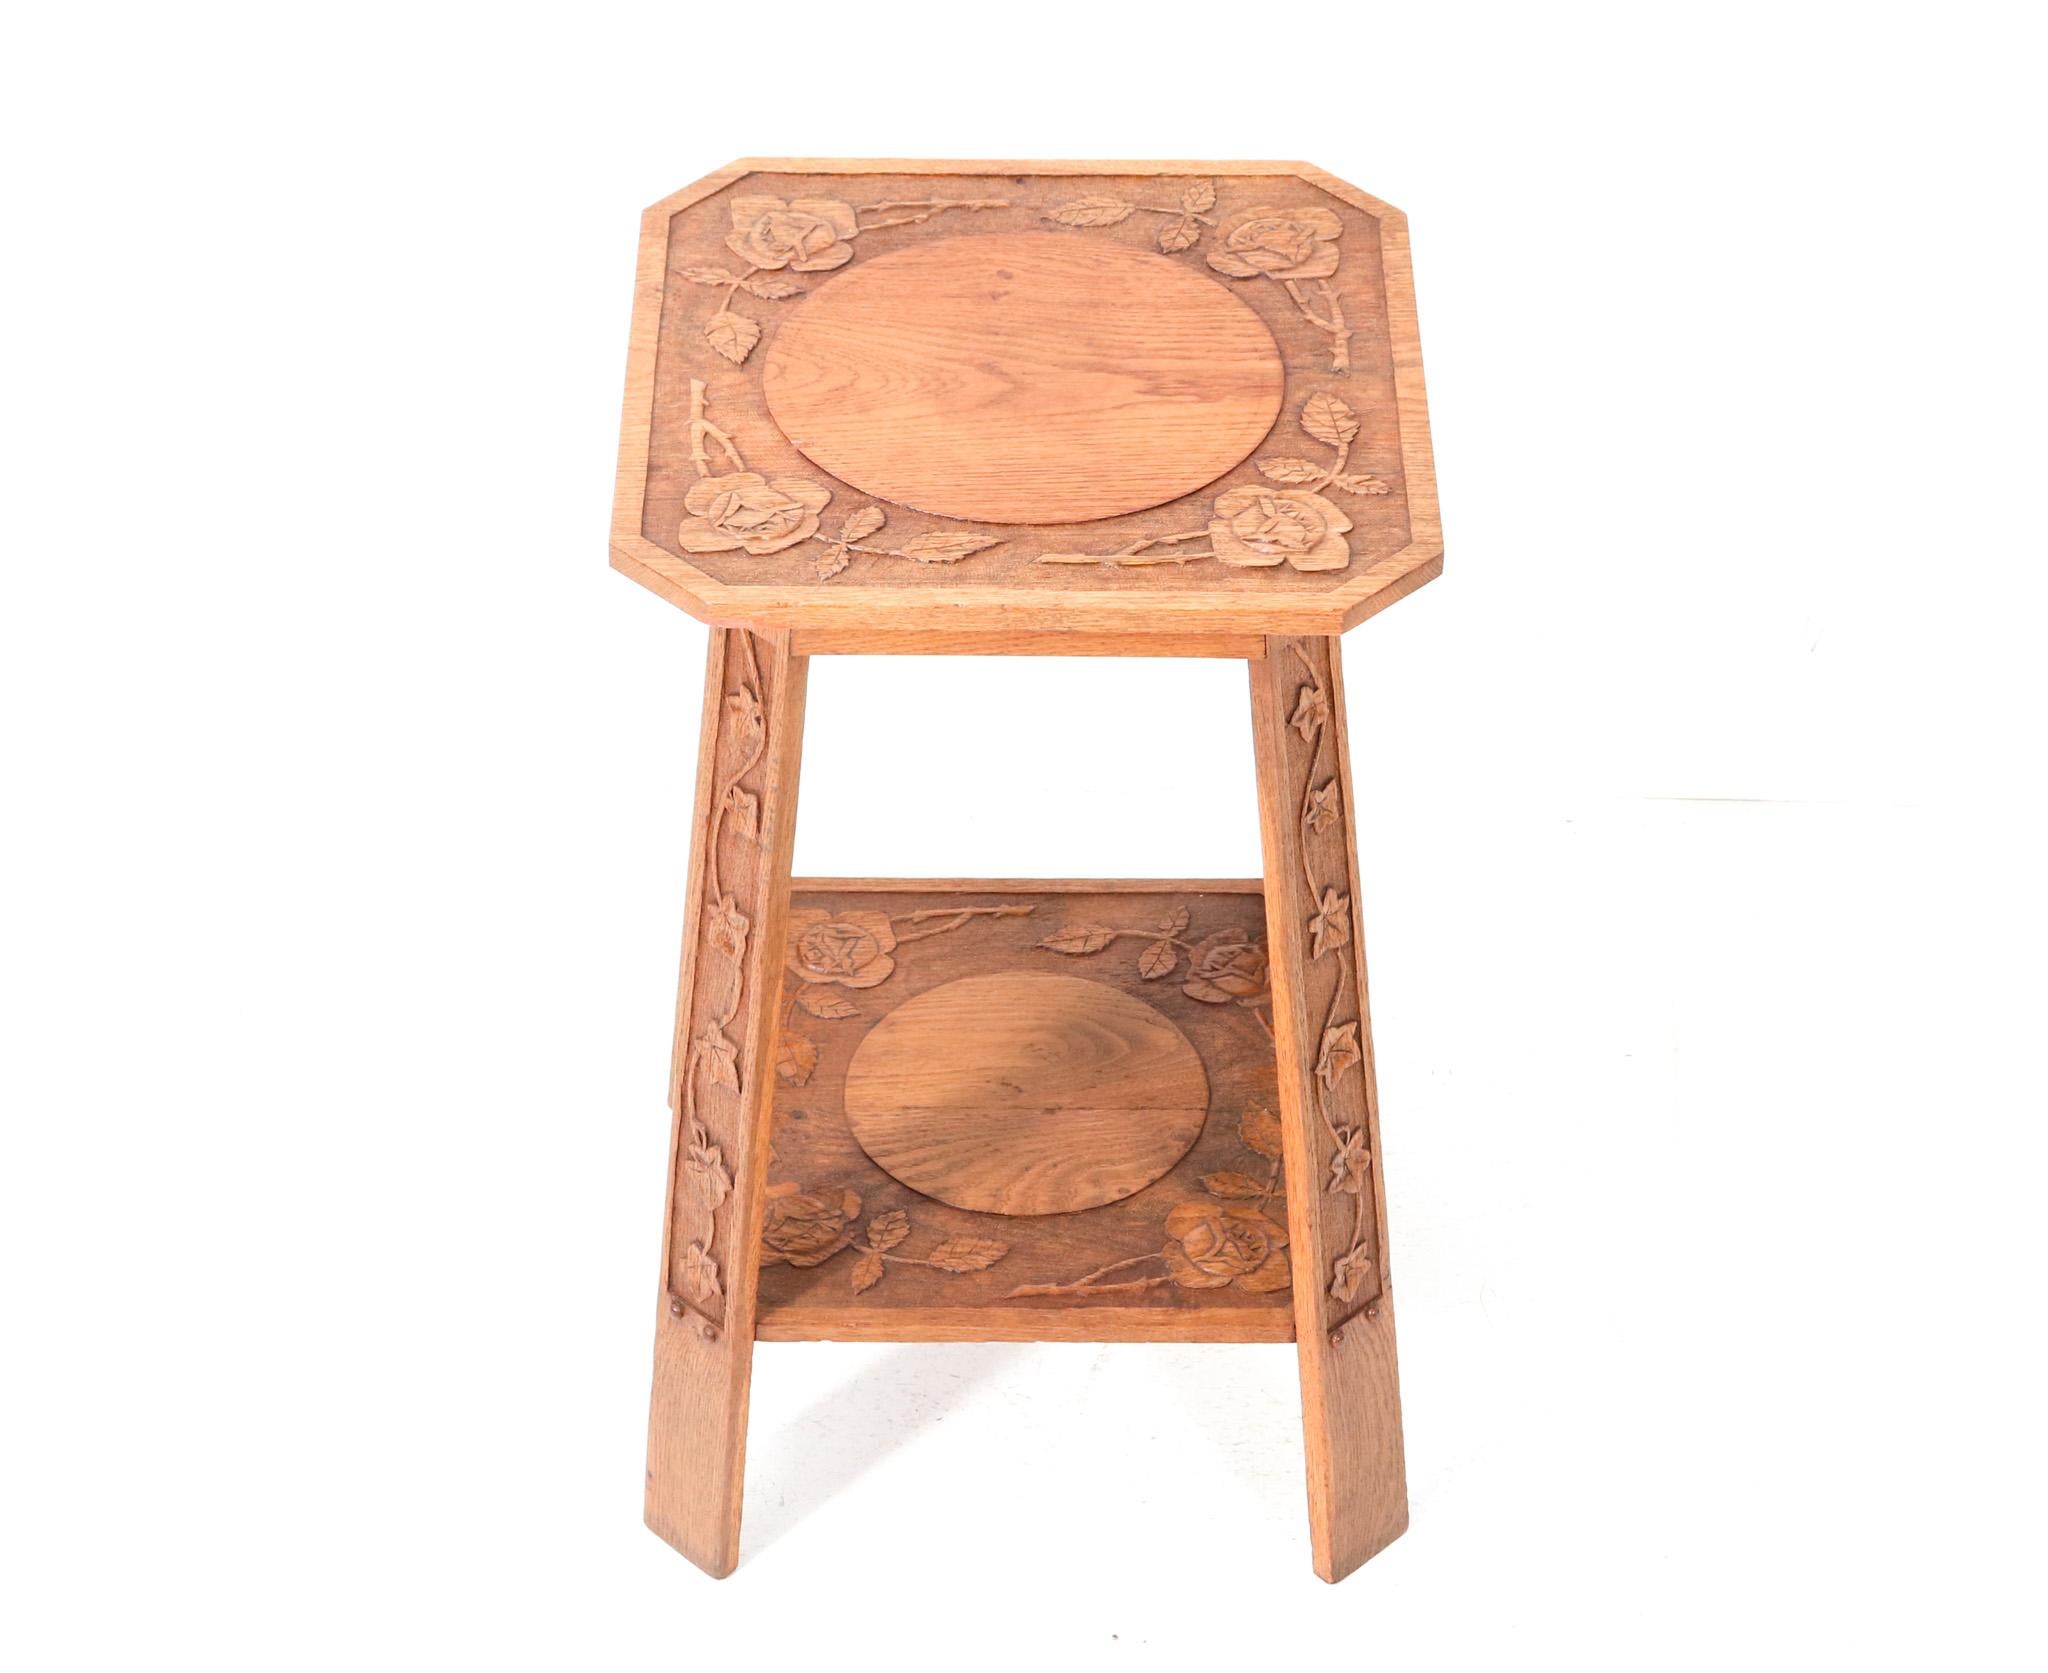 Stunning and rare Art Nouveau Arts & Crafts side table.
Striking Dutch design from the 1900s.
Solid oak frame with hand-carved flowers on top and legs.
This wonderful Art Nouveau Arts & Crafts side table is in very good condition with minor wear